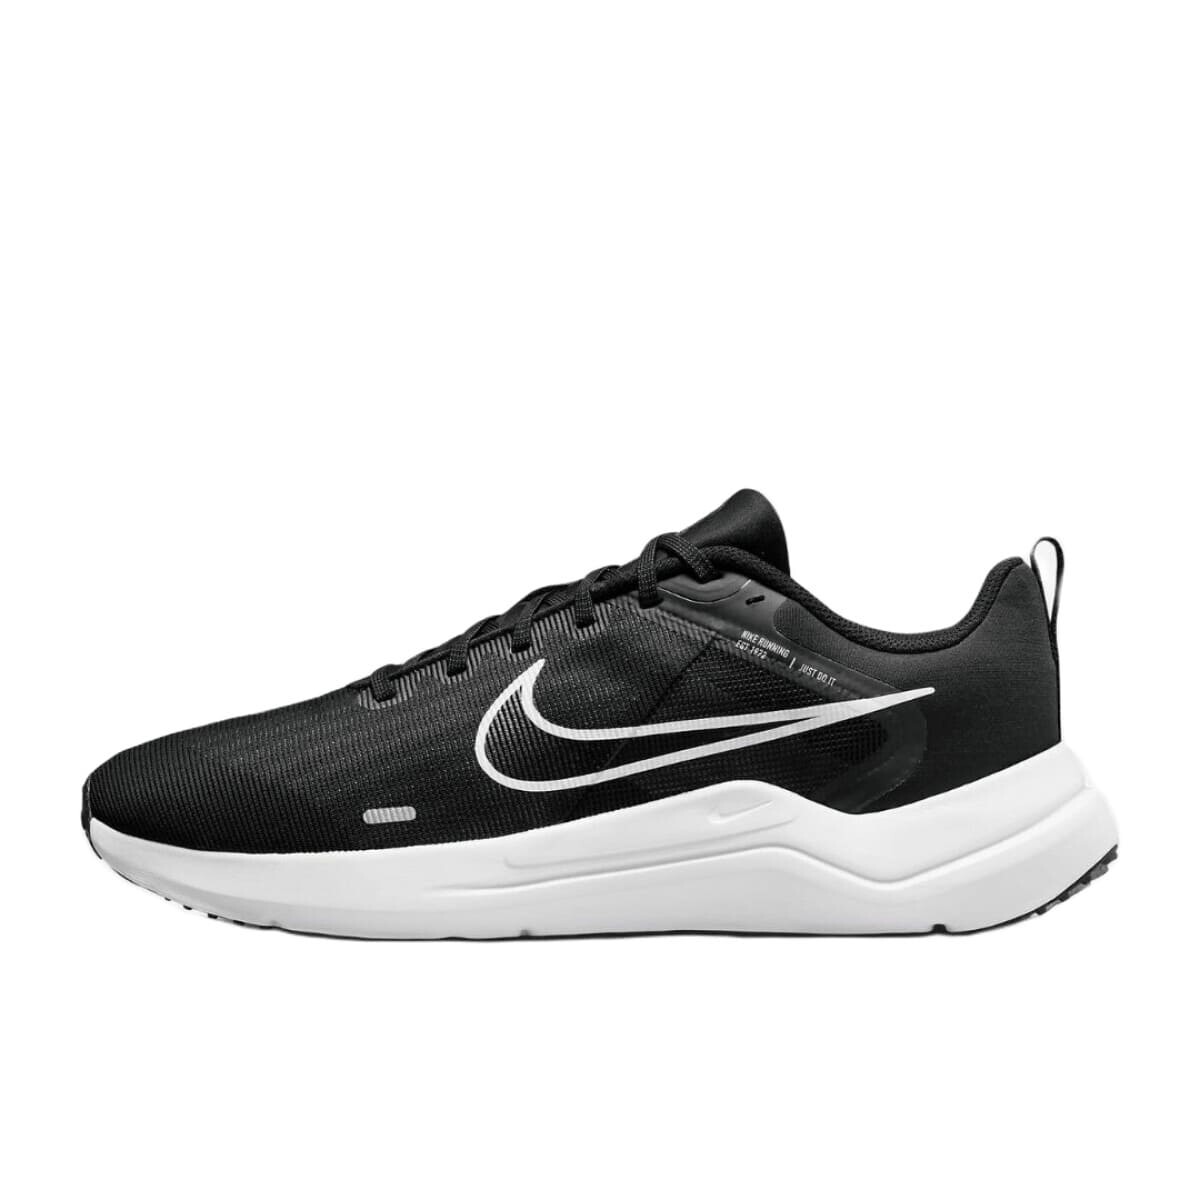 Champion Nike Running Hombre Downshifter 12 Blk - S/C 